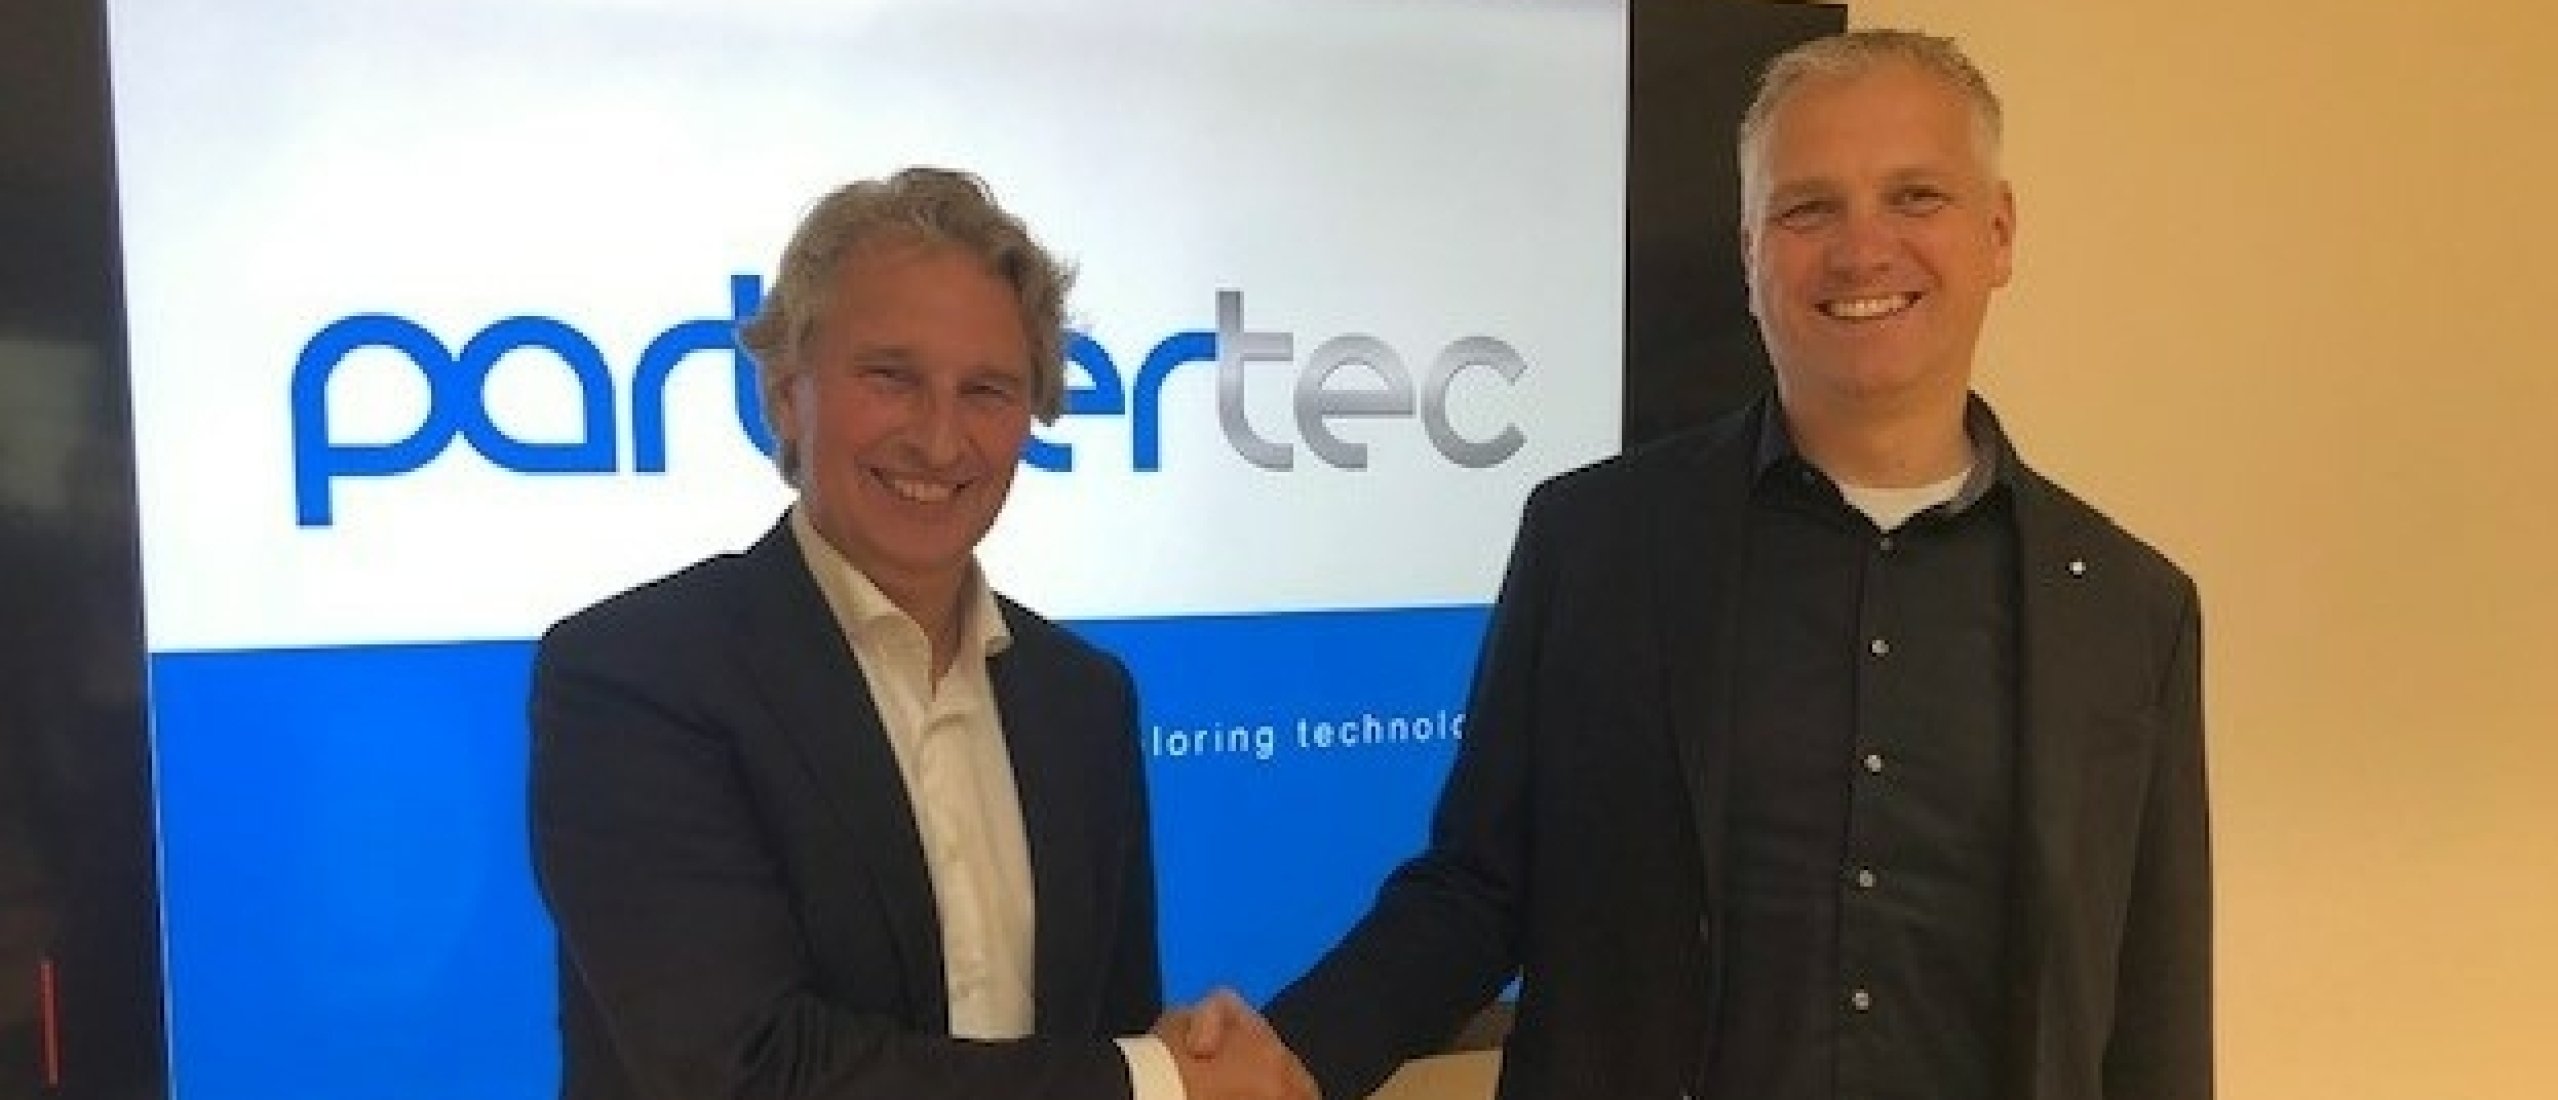 Joost Hermans - New Operations Manager at Partnertec